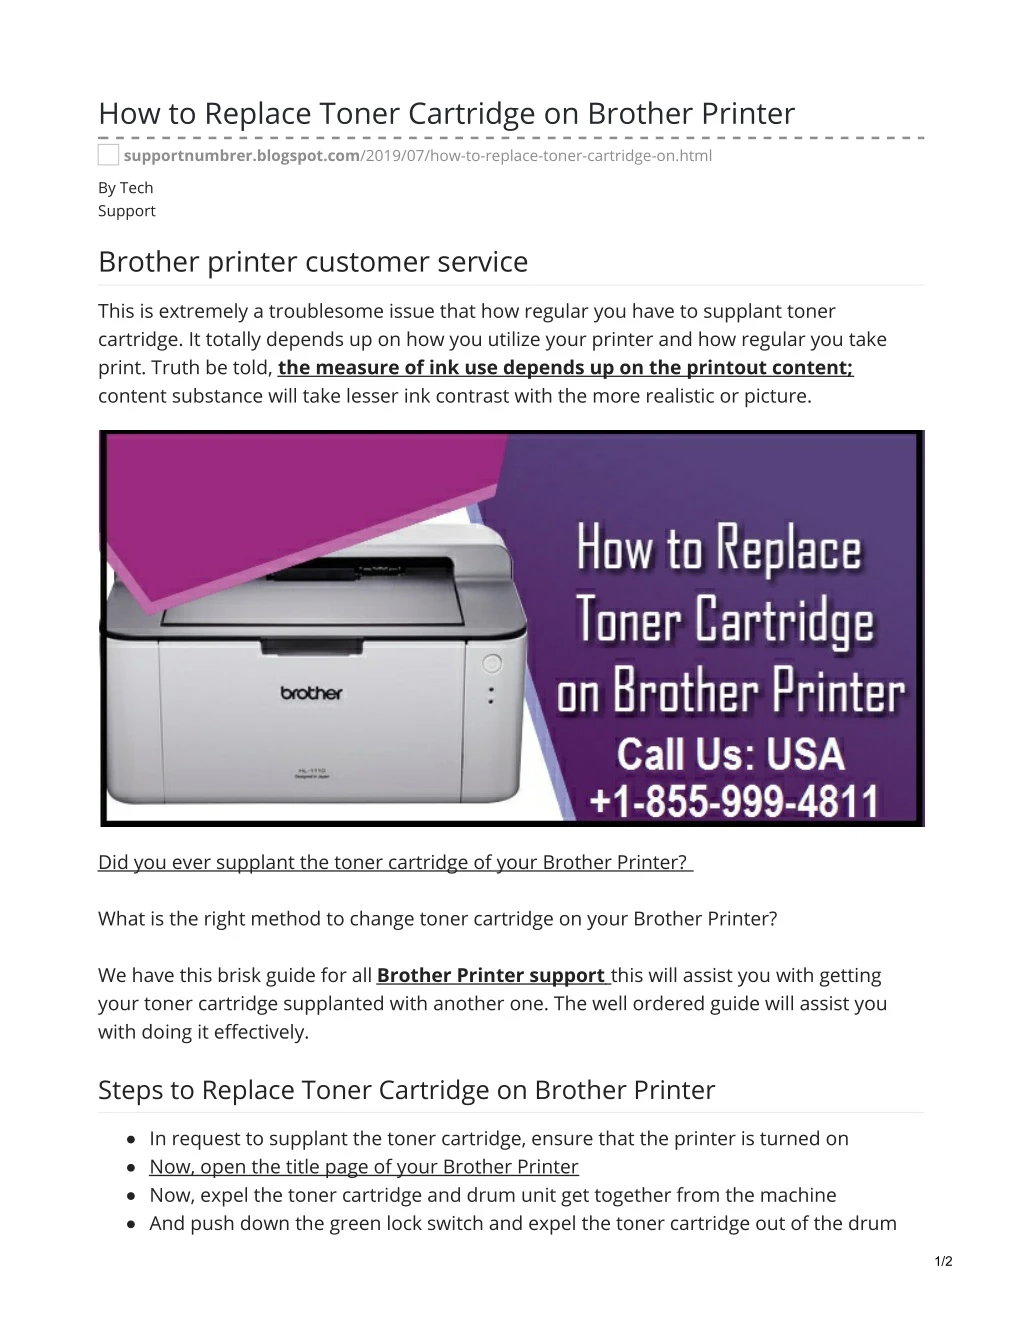 how to replace toner cartridge on brother printer